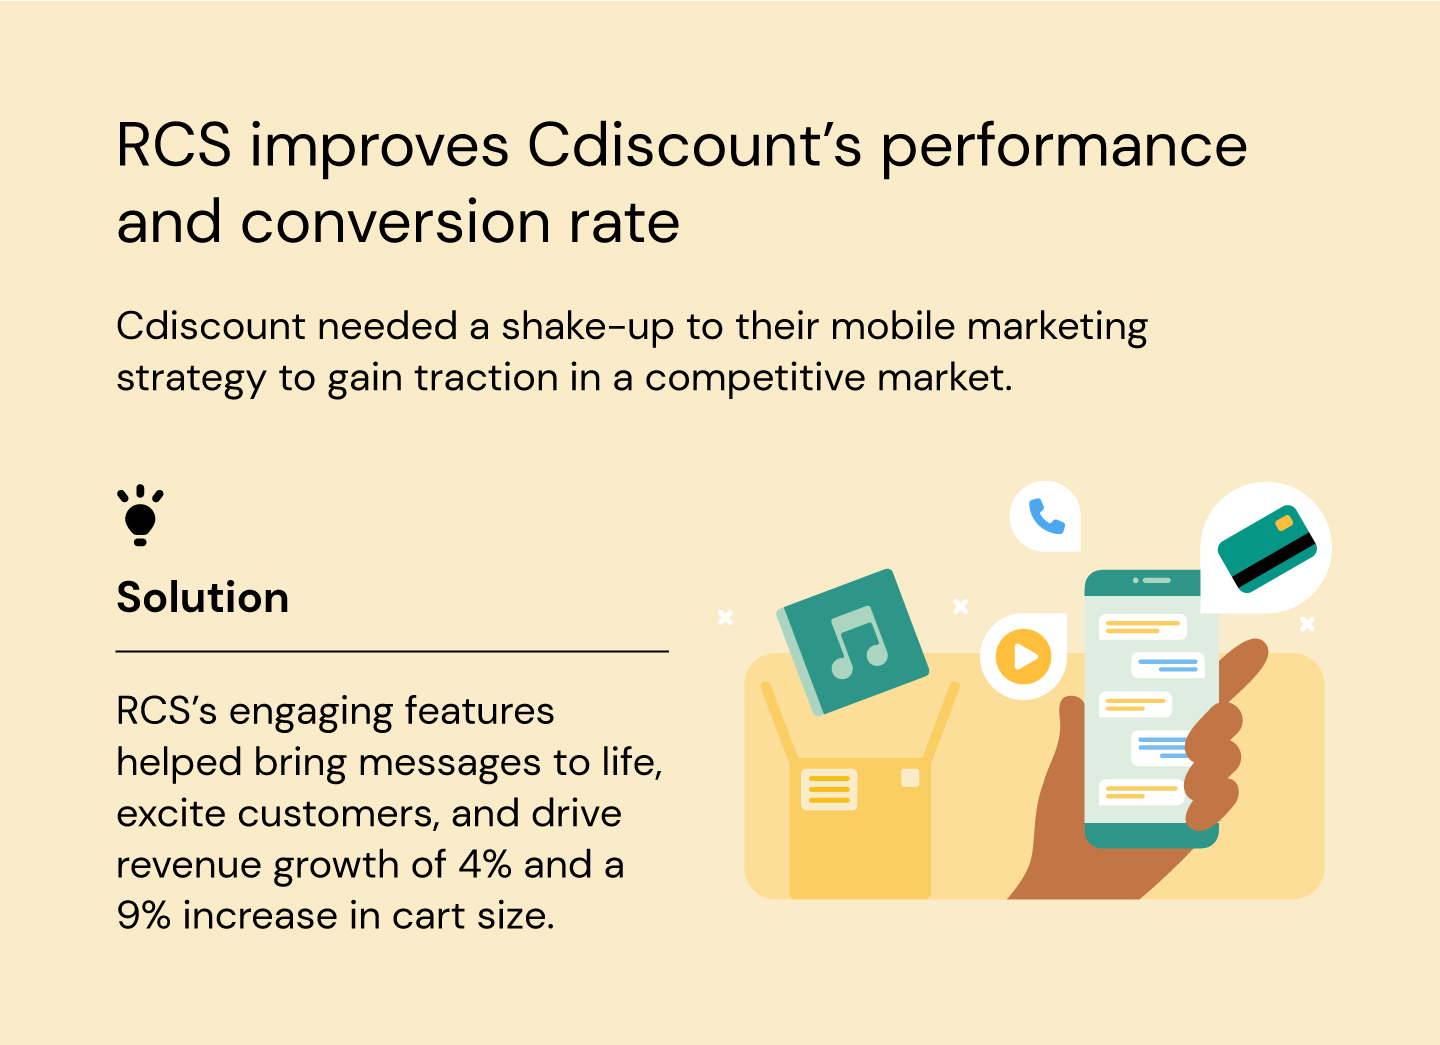 How RCS helped Cdiscount improve their conversion rate